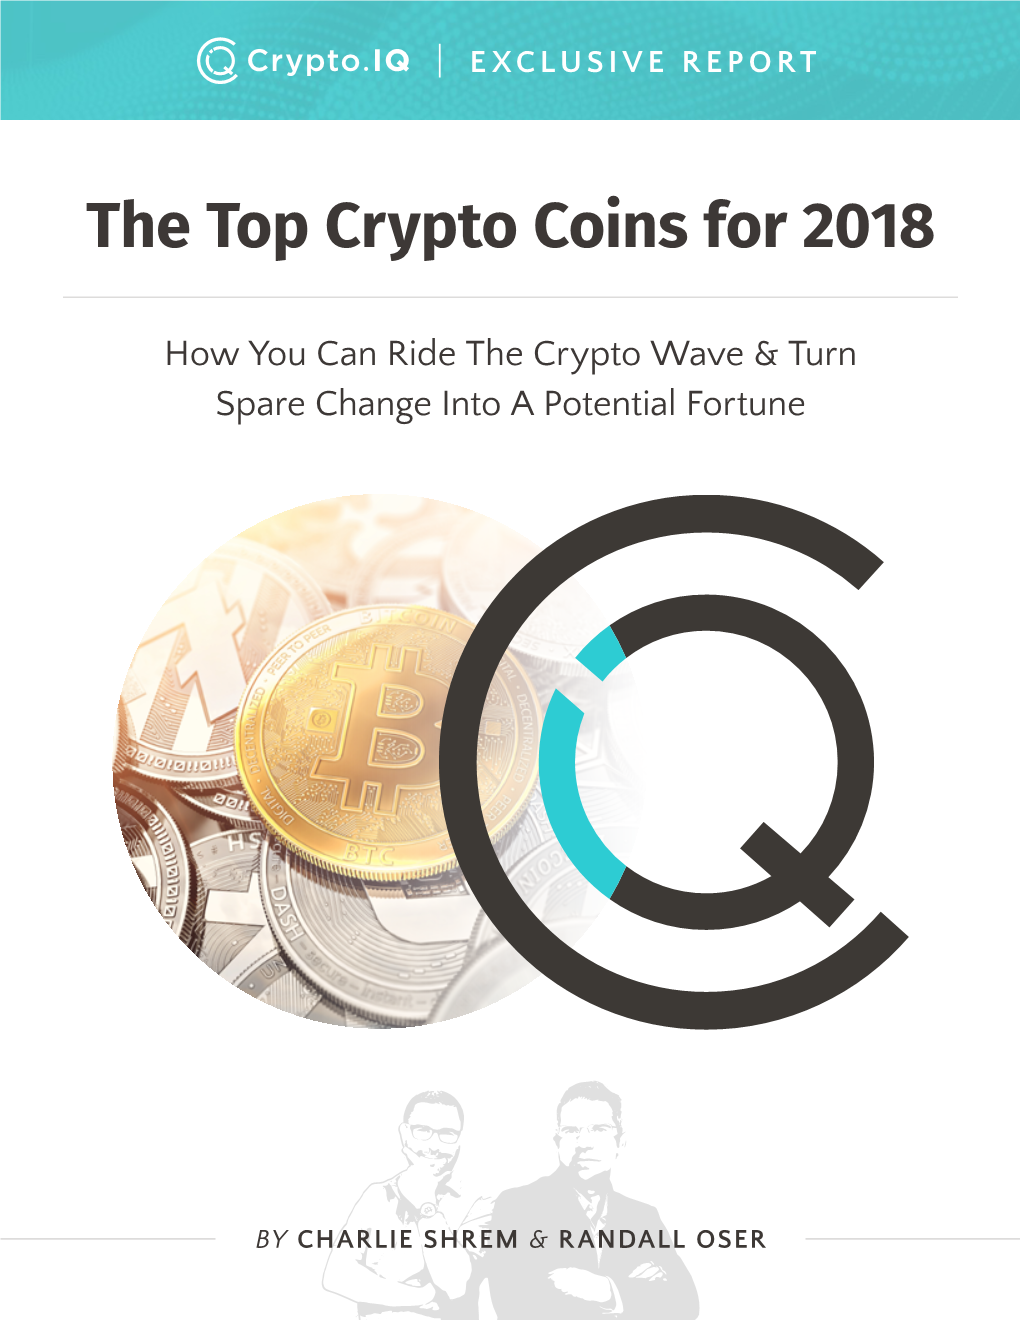 The Top Crypto Coins for 2018